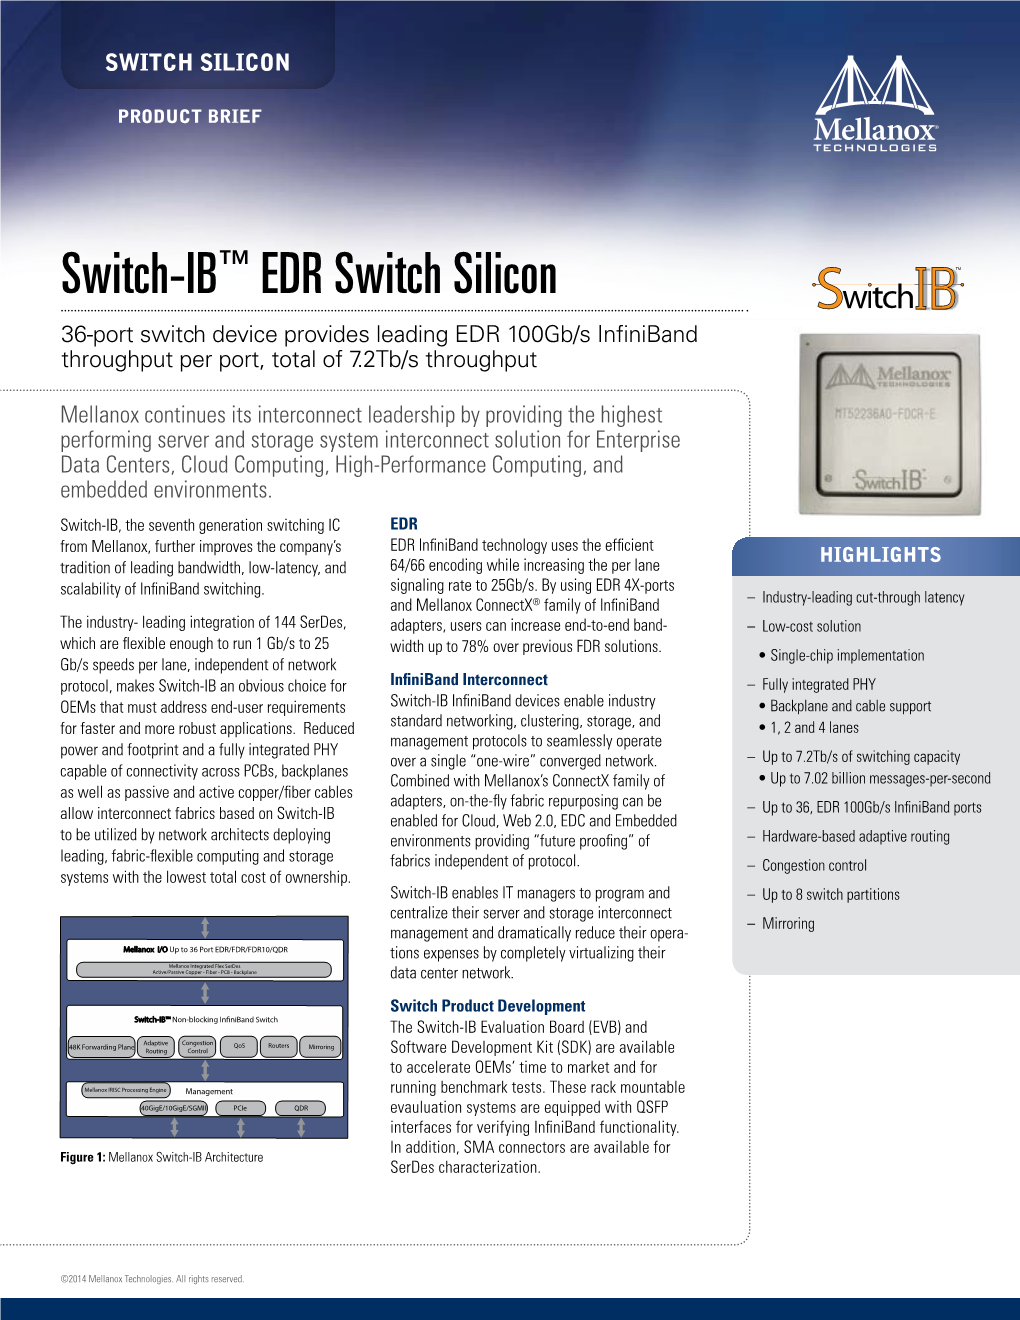 Switch-IB™ EDR Switch Silicon 36-Port Switch Device Provides Leading EDR 100Gb/S Infiniband Throughput Per Port, Total of 7.2Tb/S Throughput